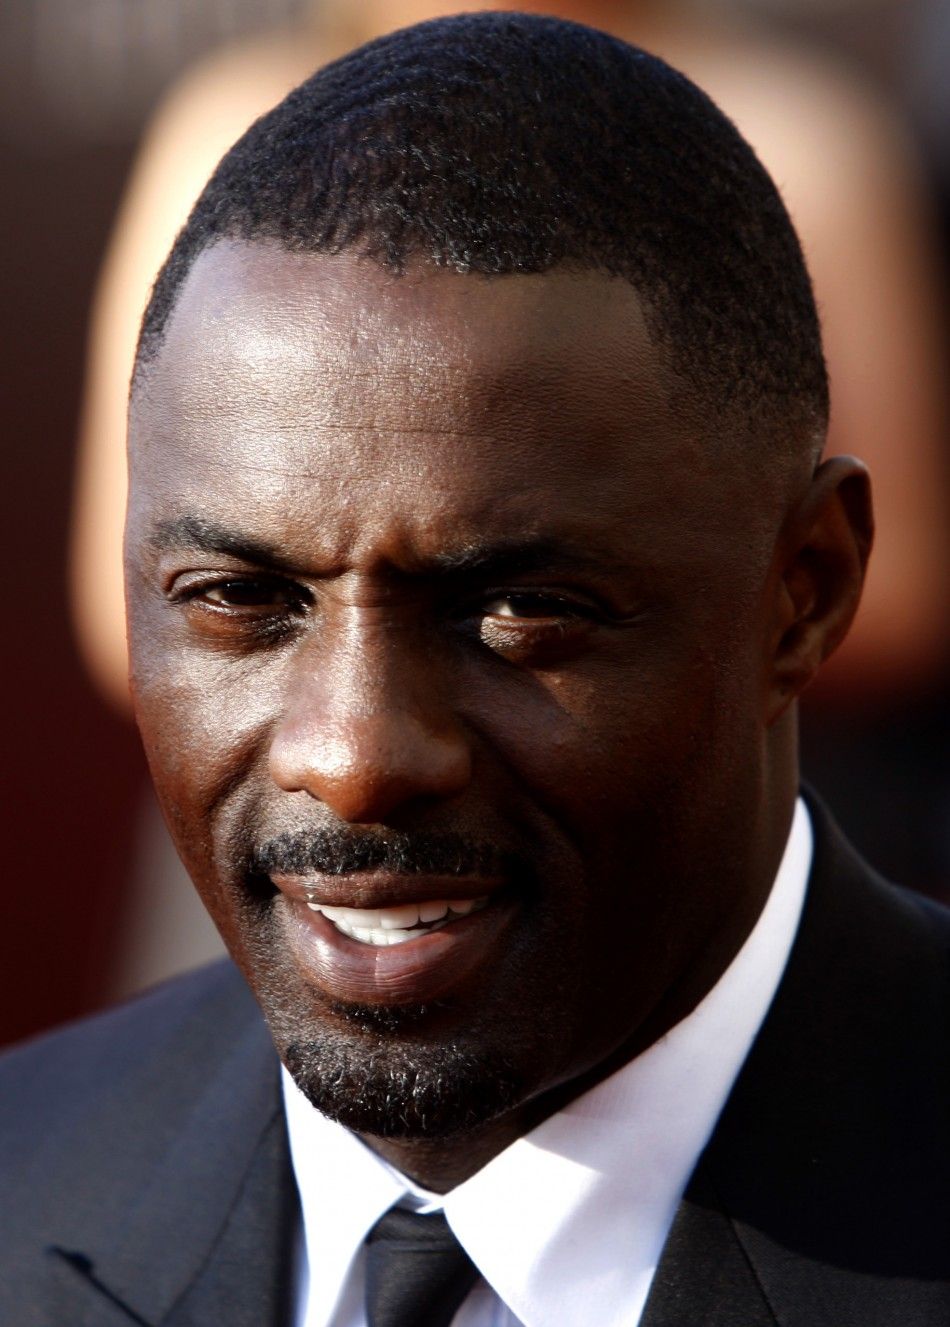 Actor Idris Elba arrives for the British Academy Television Awards 2009 at the Royal Festival Hall in London April 26, 2009. 